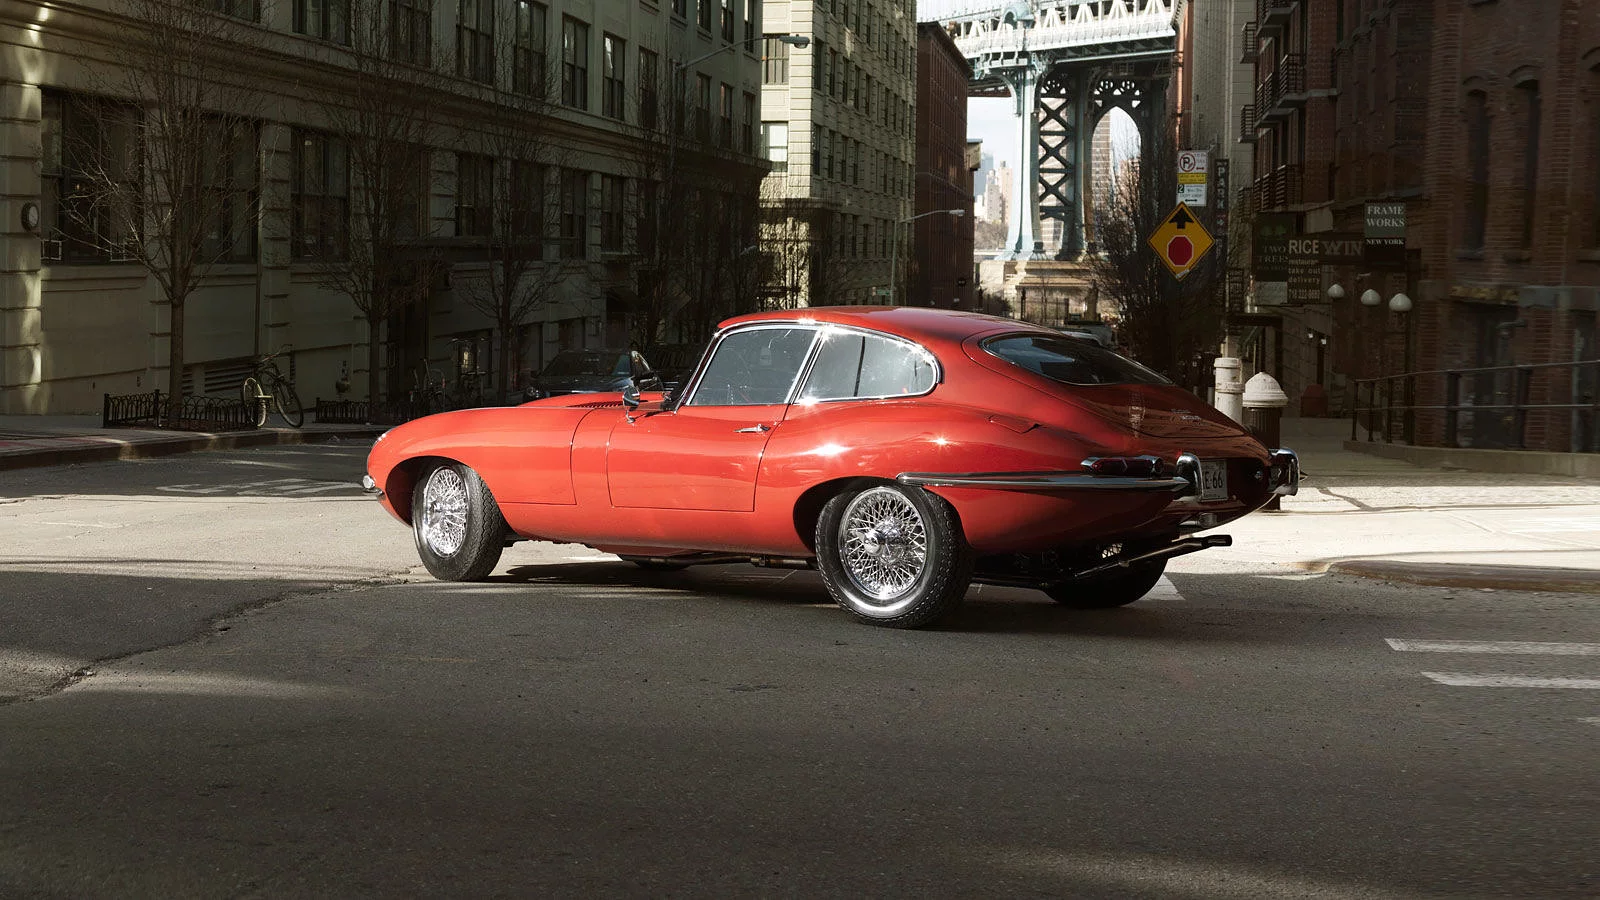 CONTINUE YOUR JOURNEY INTO THE SENSATIONAL 1960S WITH E‑TYPE, XJ AND MORE.